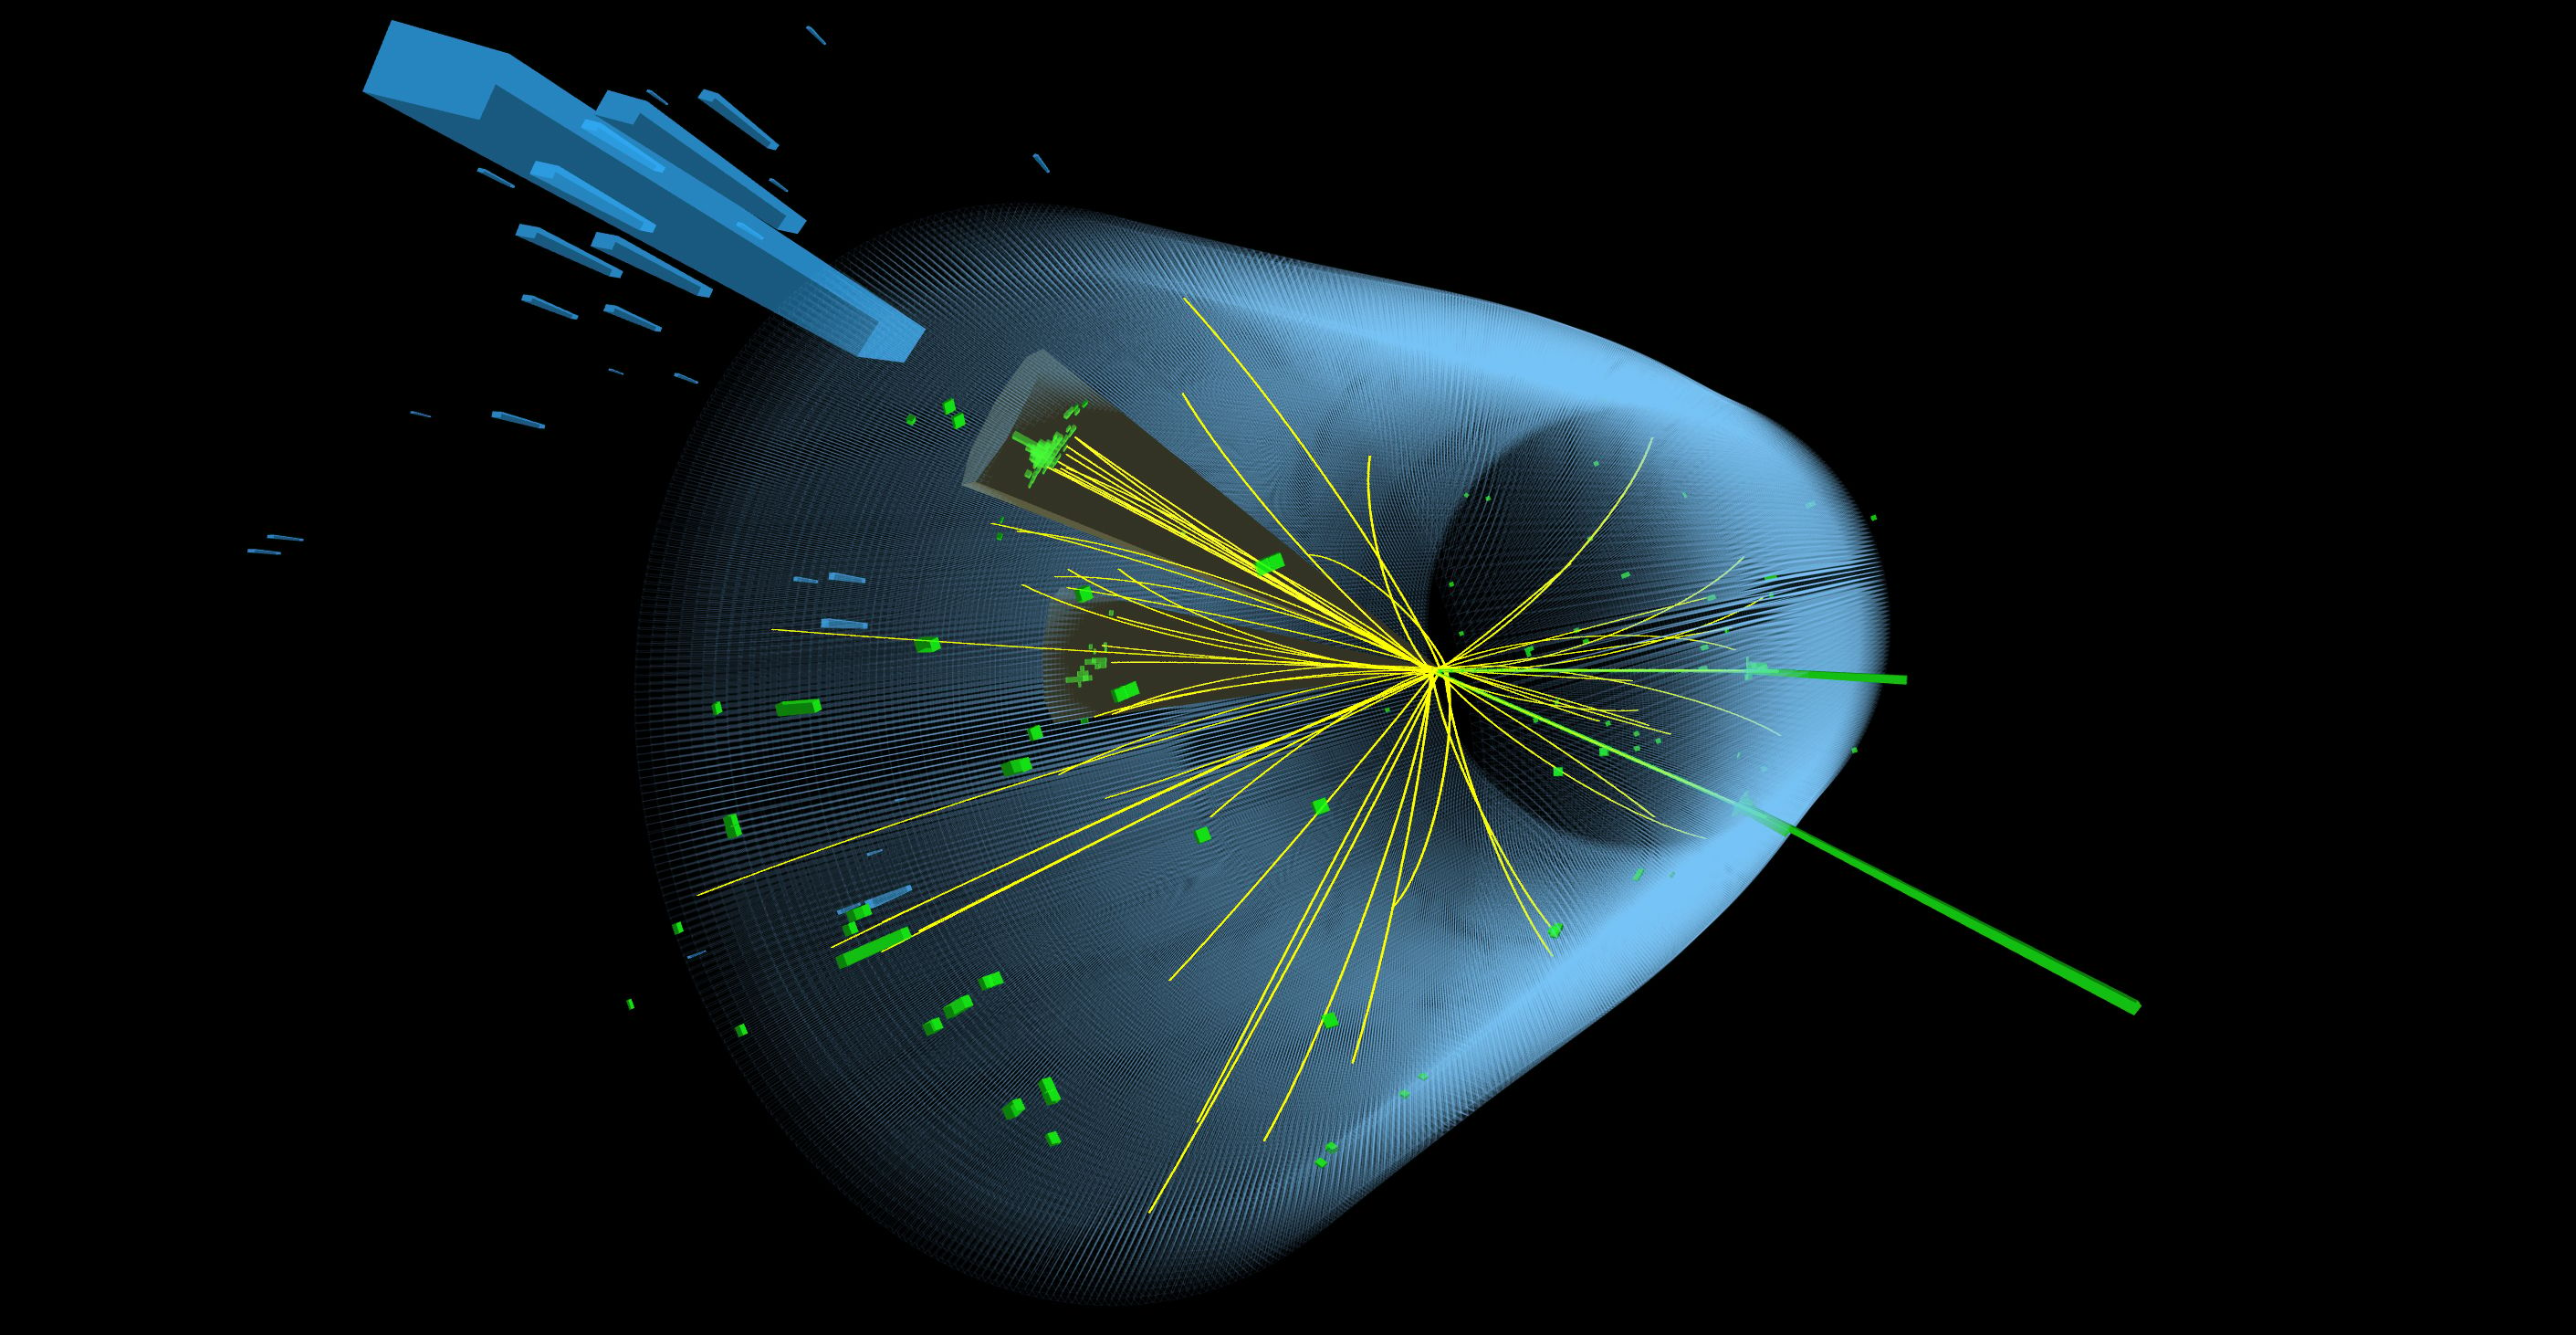 New W boson particle finding contradicts the understanding of how the universe works